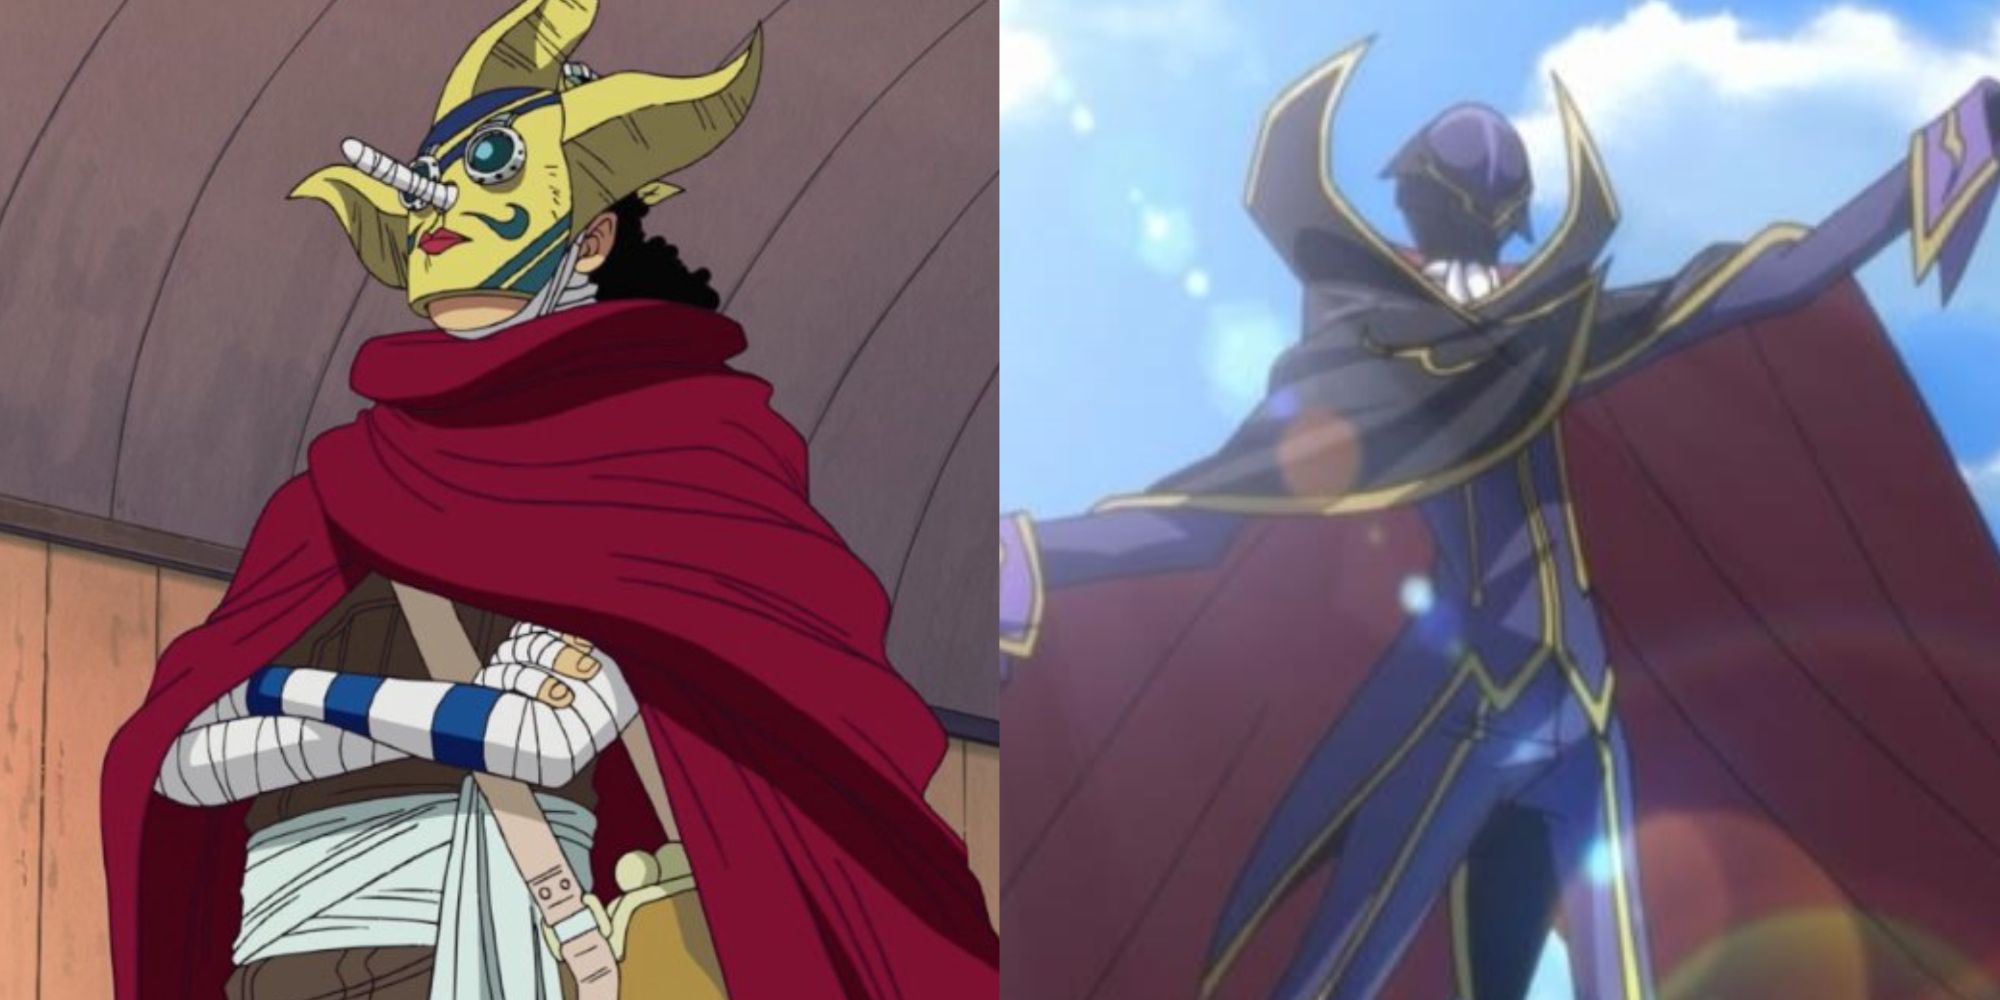 Sogeking and Zero, the alter ego of Usopp and Lelouch Lamperouge from One PIece and Code Geass, respectively